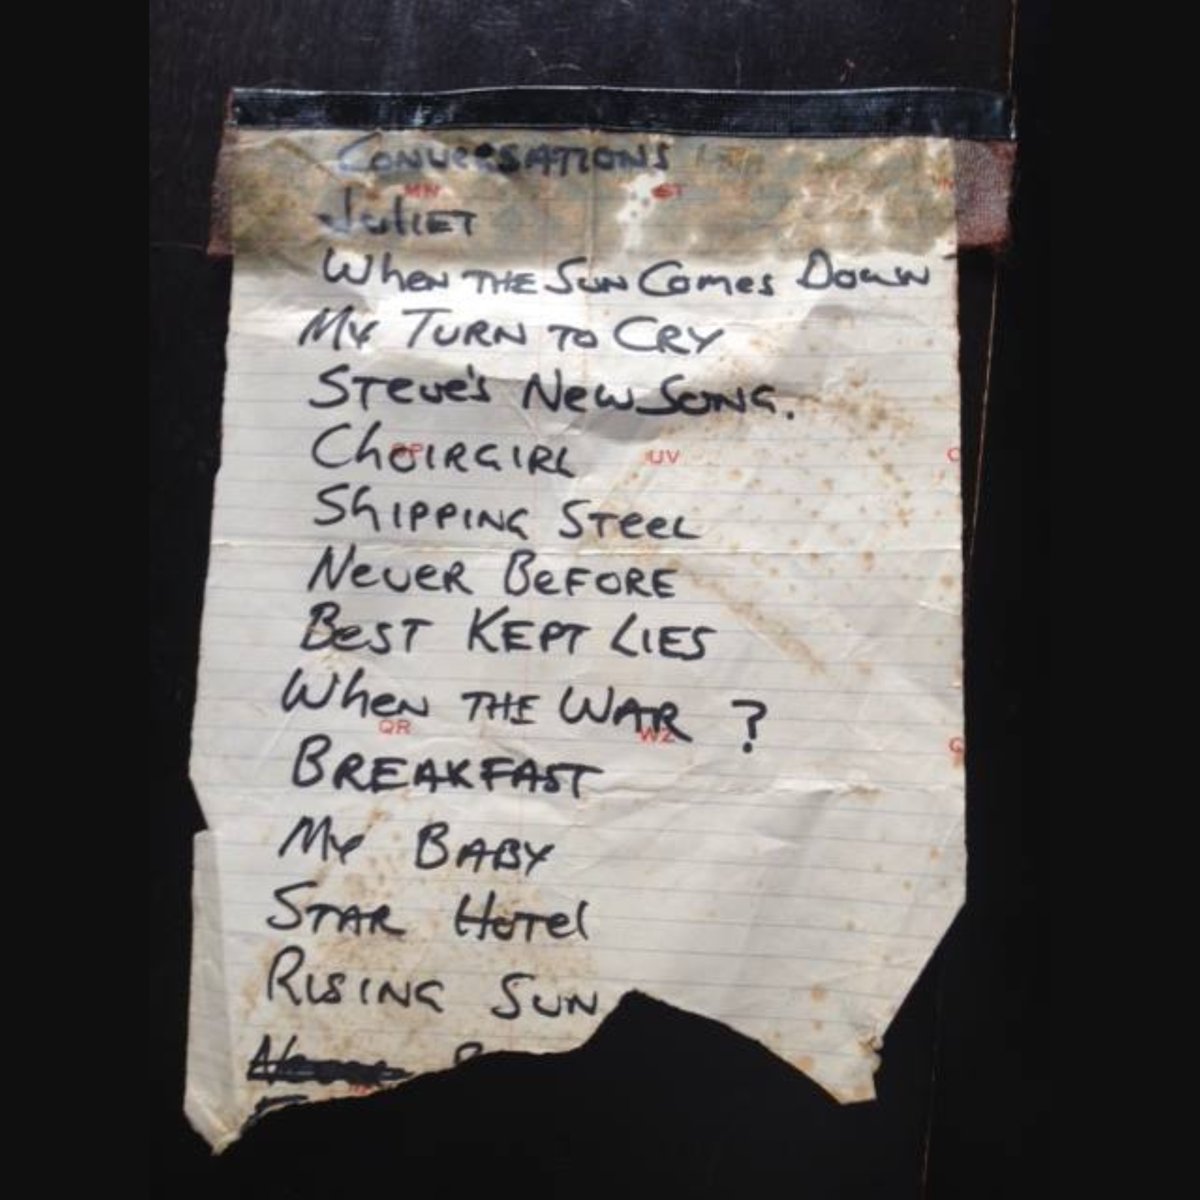 Ragged old Cold Chisel set list. This must have been while the band was workshopping songs for Circus Animals. 'Steve's New Song' is probably Forever Now.